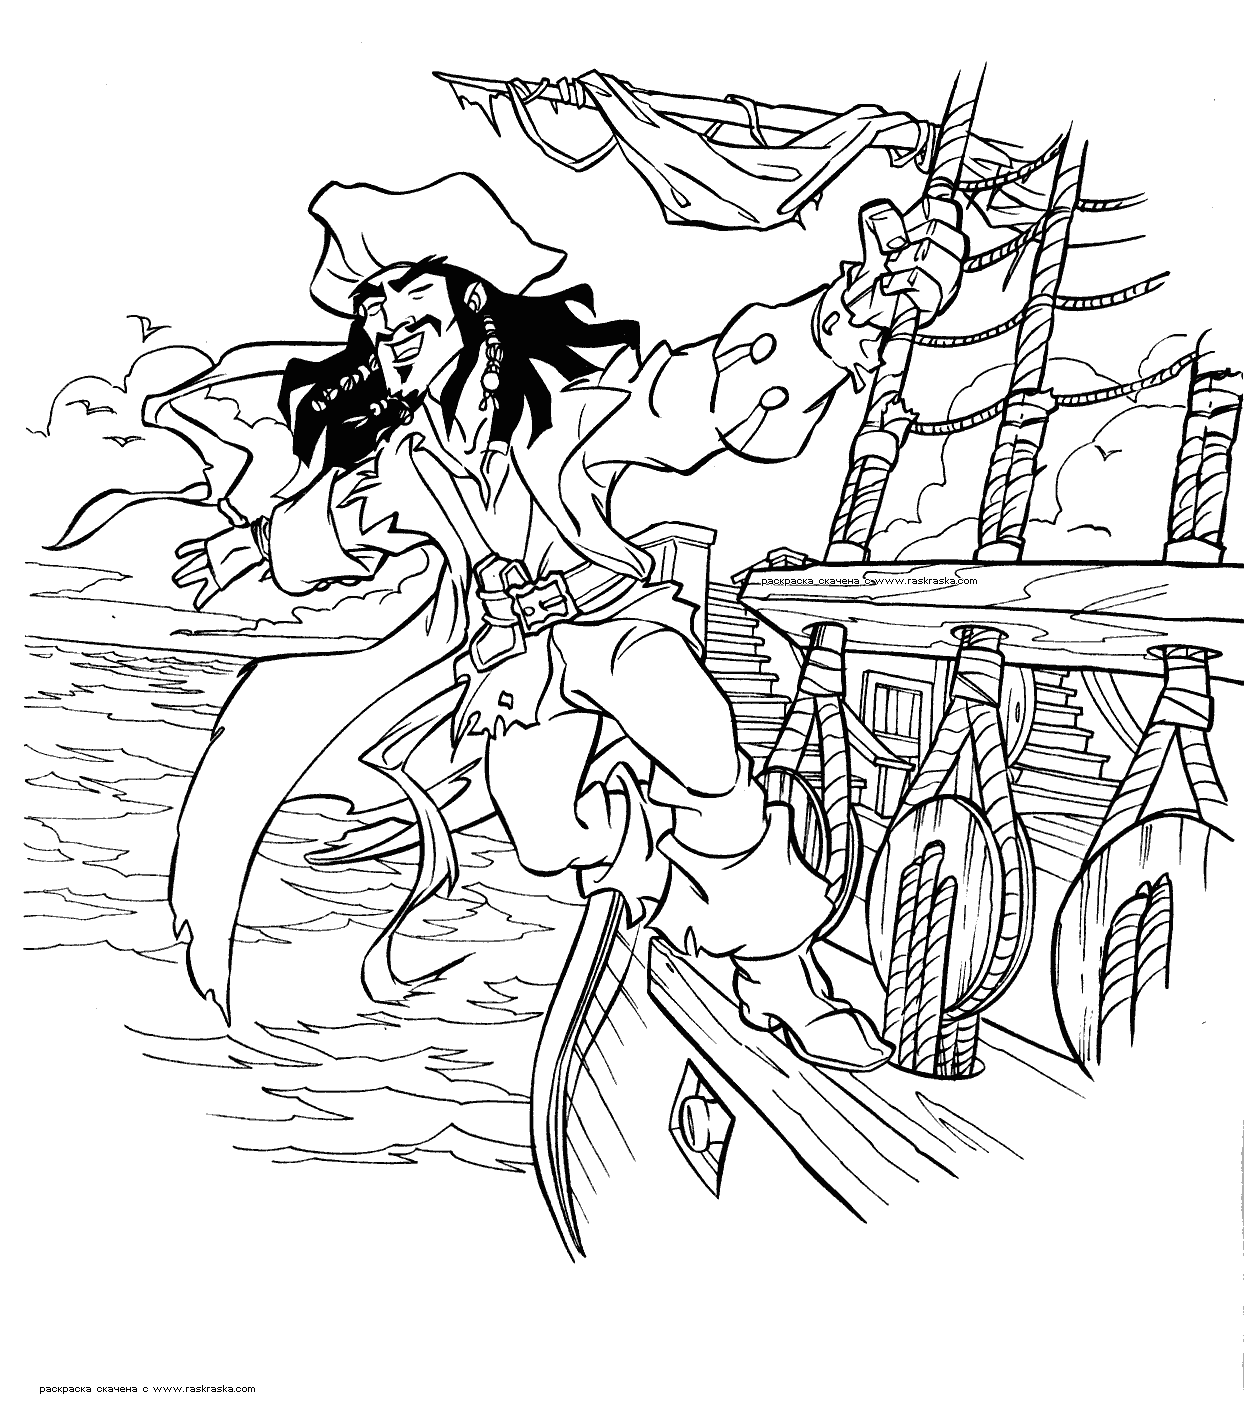 pirate coloring pages for kids pirate ship coloring pages these cartoon pirate coloring for pages pirate coloring kids 